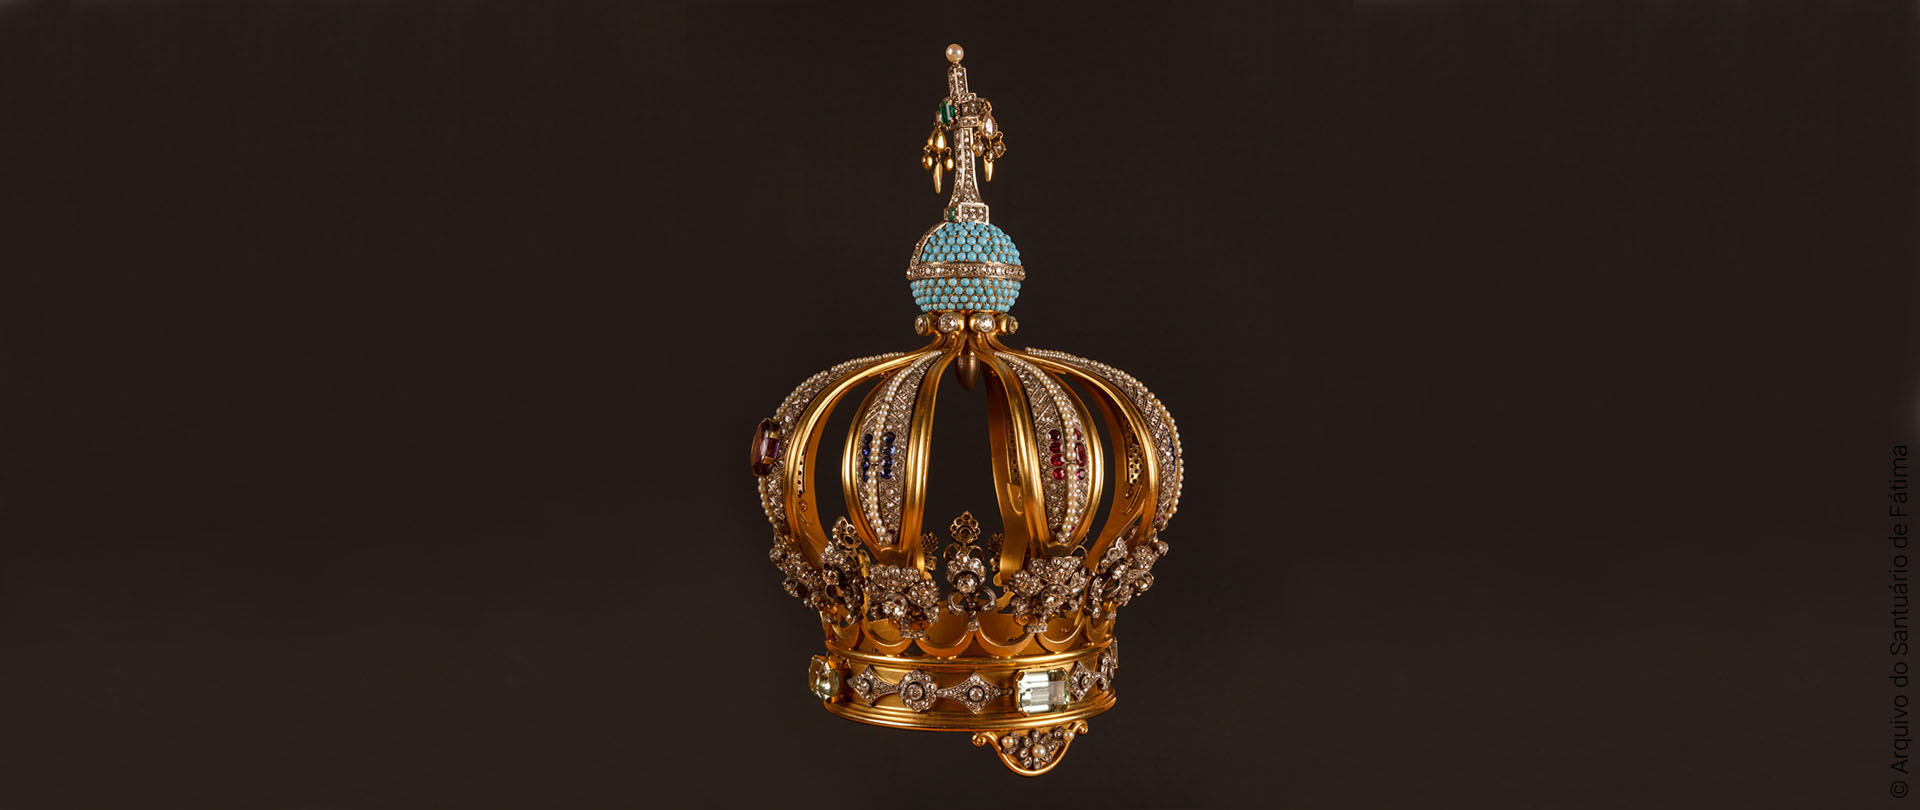 «Precious Crown of the Image of Our Lady of Fatima», c. 1948, Crown (gold, silver and precious stones - c. 2680 stones and 313 pearls - of jewelry donated to the Virgin as a thanksgiving for her protection to the country during World War II. In 1984 the projectile that shot Pope John Paul II on May 13, 1981 it was integrated into the crown, as a relic of contact). Produced by Casa Leitão & Irmão and the projectile was inserted by Ourivesaria Gomes da Póvoa. Height: 24 cm, maximum Ø: 14.89 cm, Ø of the lower rim: 10.48 cm. Photo: Shrine of Fátima Archive